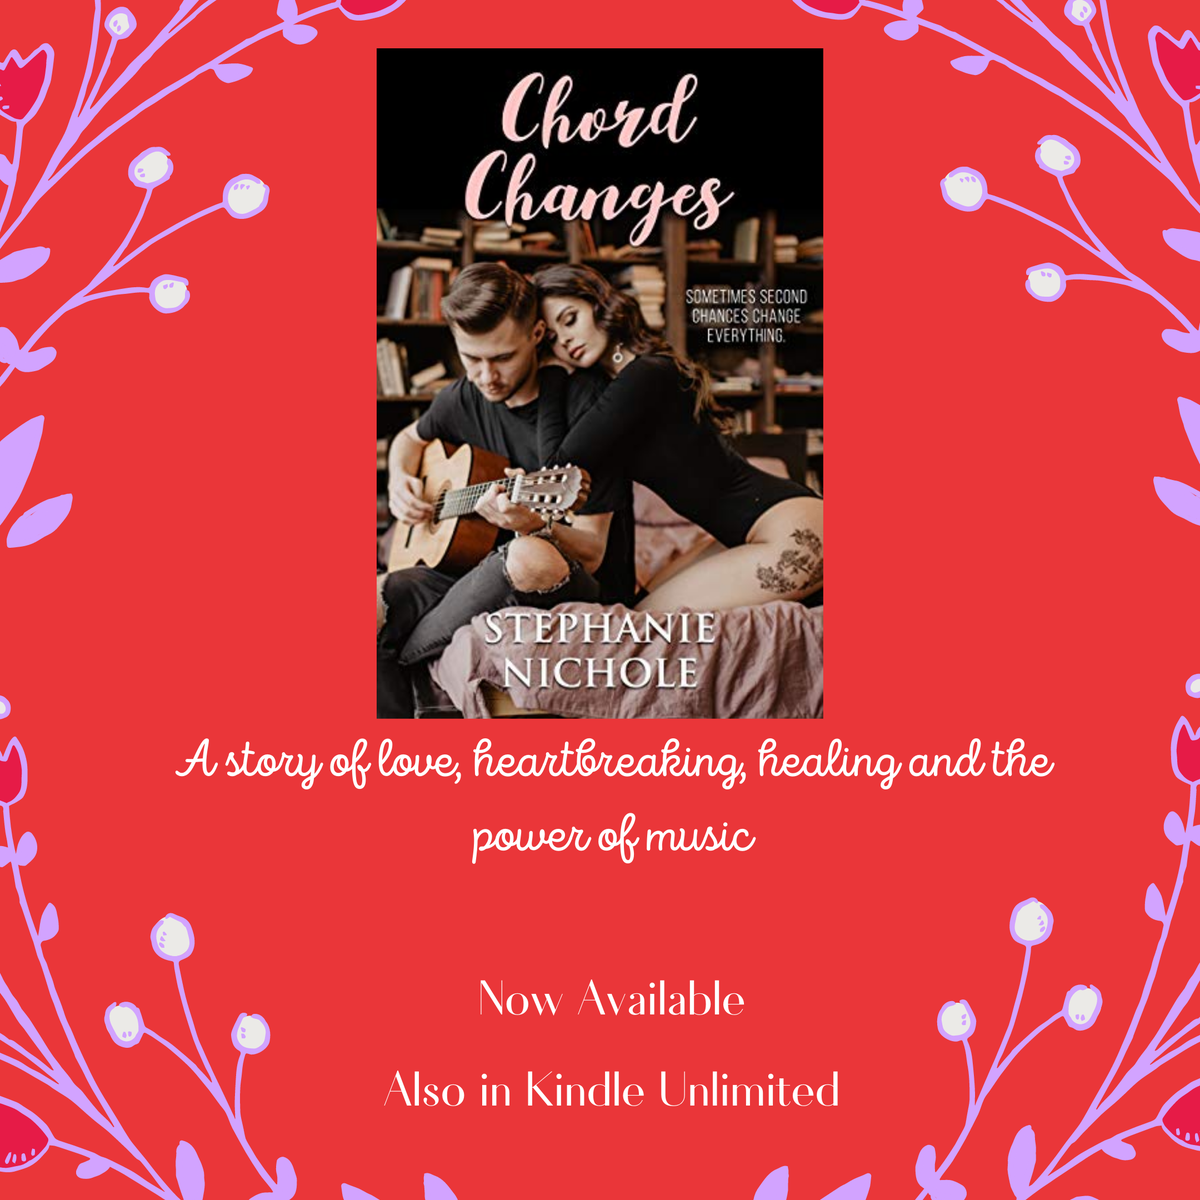 Chord Changes
By Stephanie Nichole
amazon.com/Chord-Changes-…
Also in Kindle Unlimited!

#musicromance #romance #powerfulstory #readtoday #nowavailable #kindleunlimited #readtoday #chordchanges #stephanienichole #grabyourcopy #powerofmusic #lovetriangle #formusicfans #love